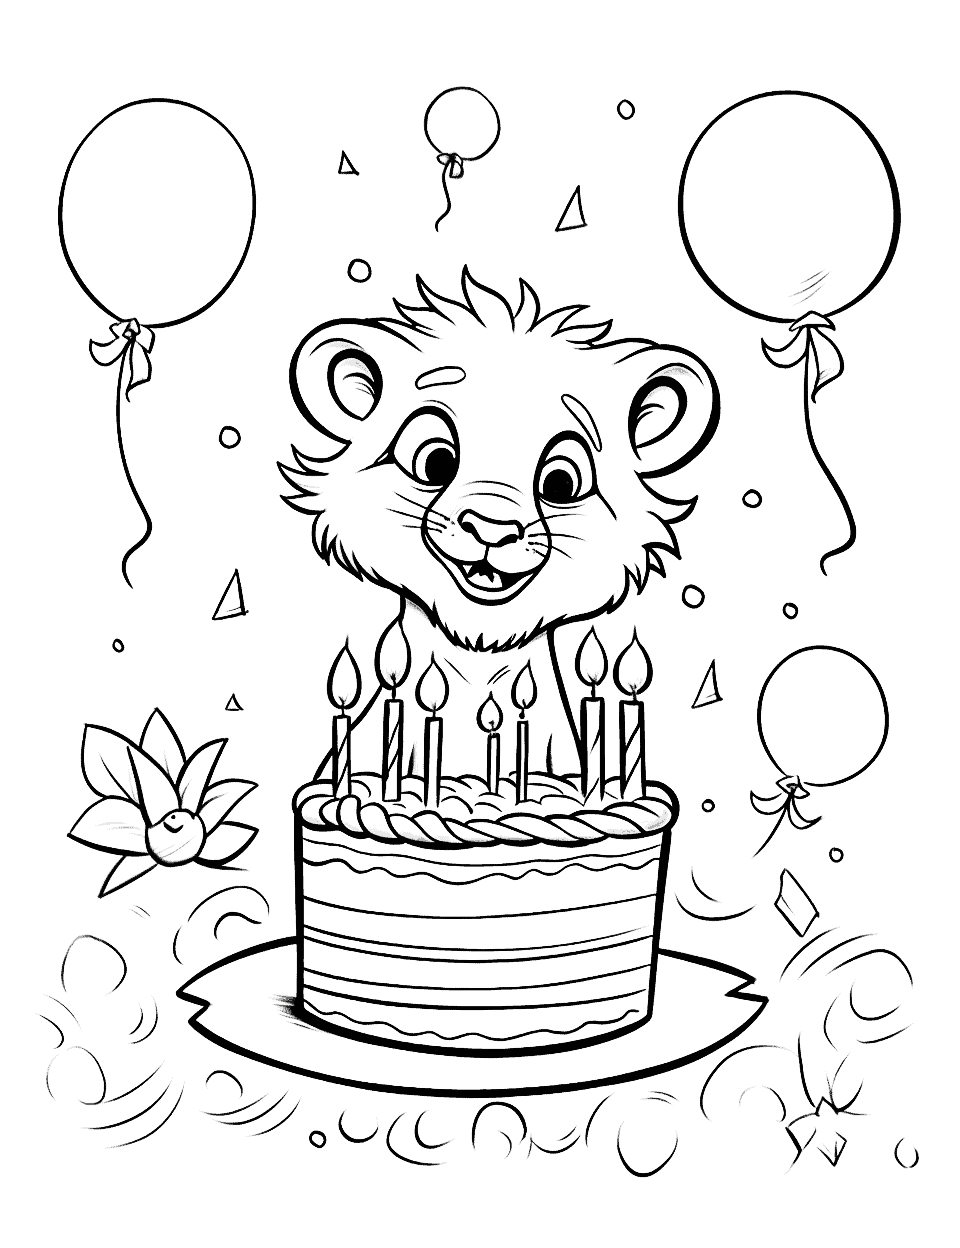 Lion King Birthday Happy Coloring Page - Simba celebrates his birthday with a cake and balloons.